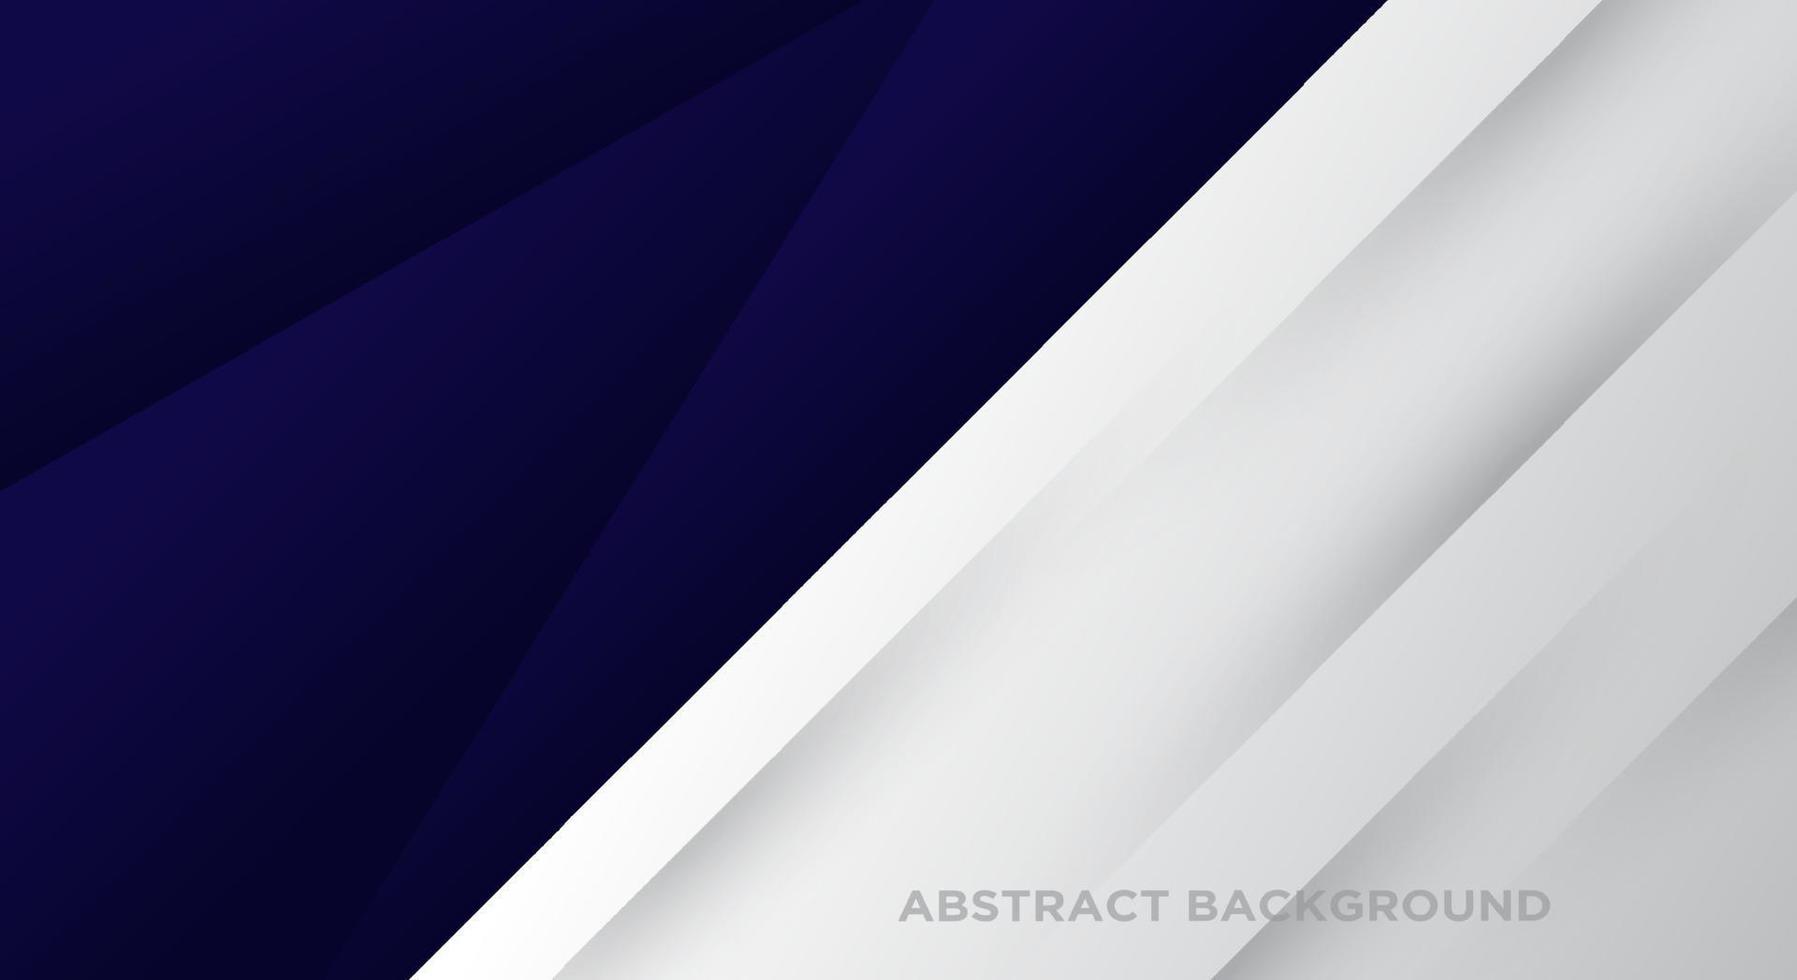 Abstract background modern futuristic graphic. Dark blue background with line. eps 10 vector